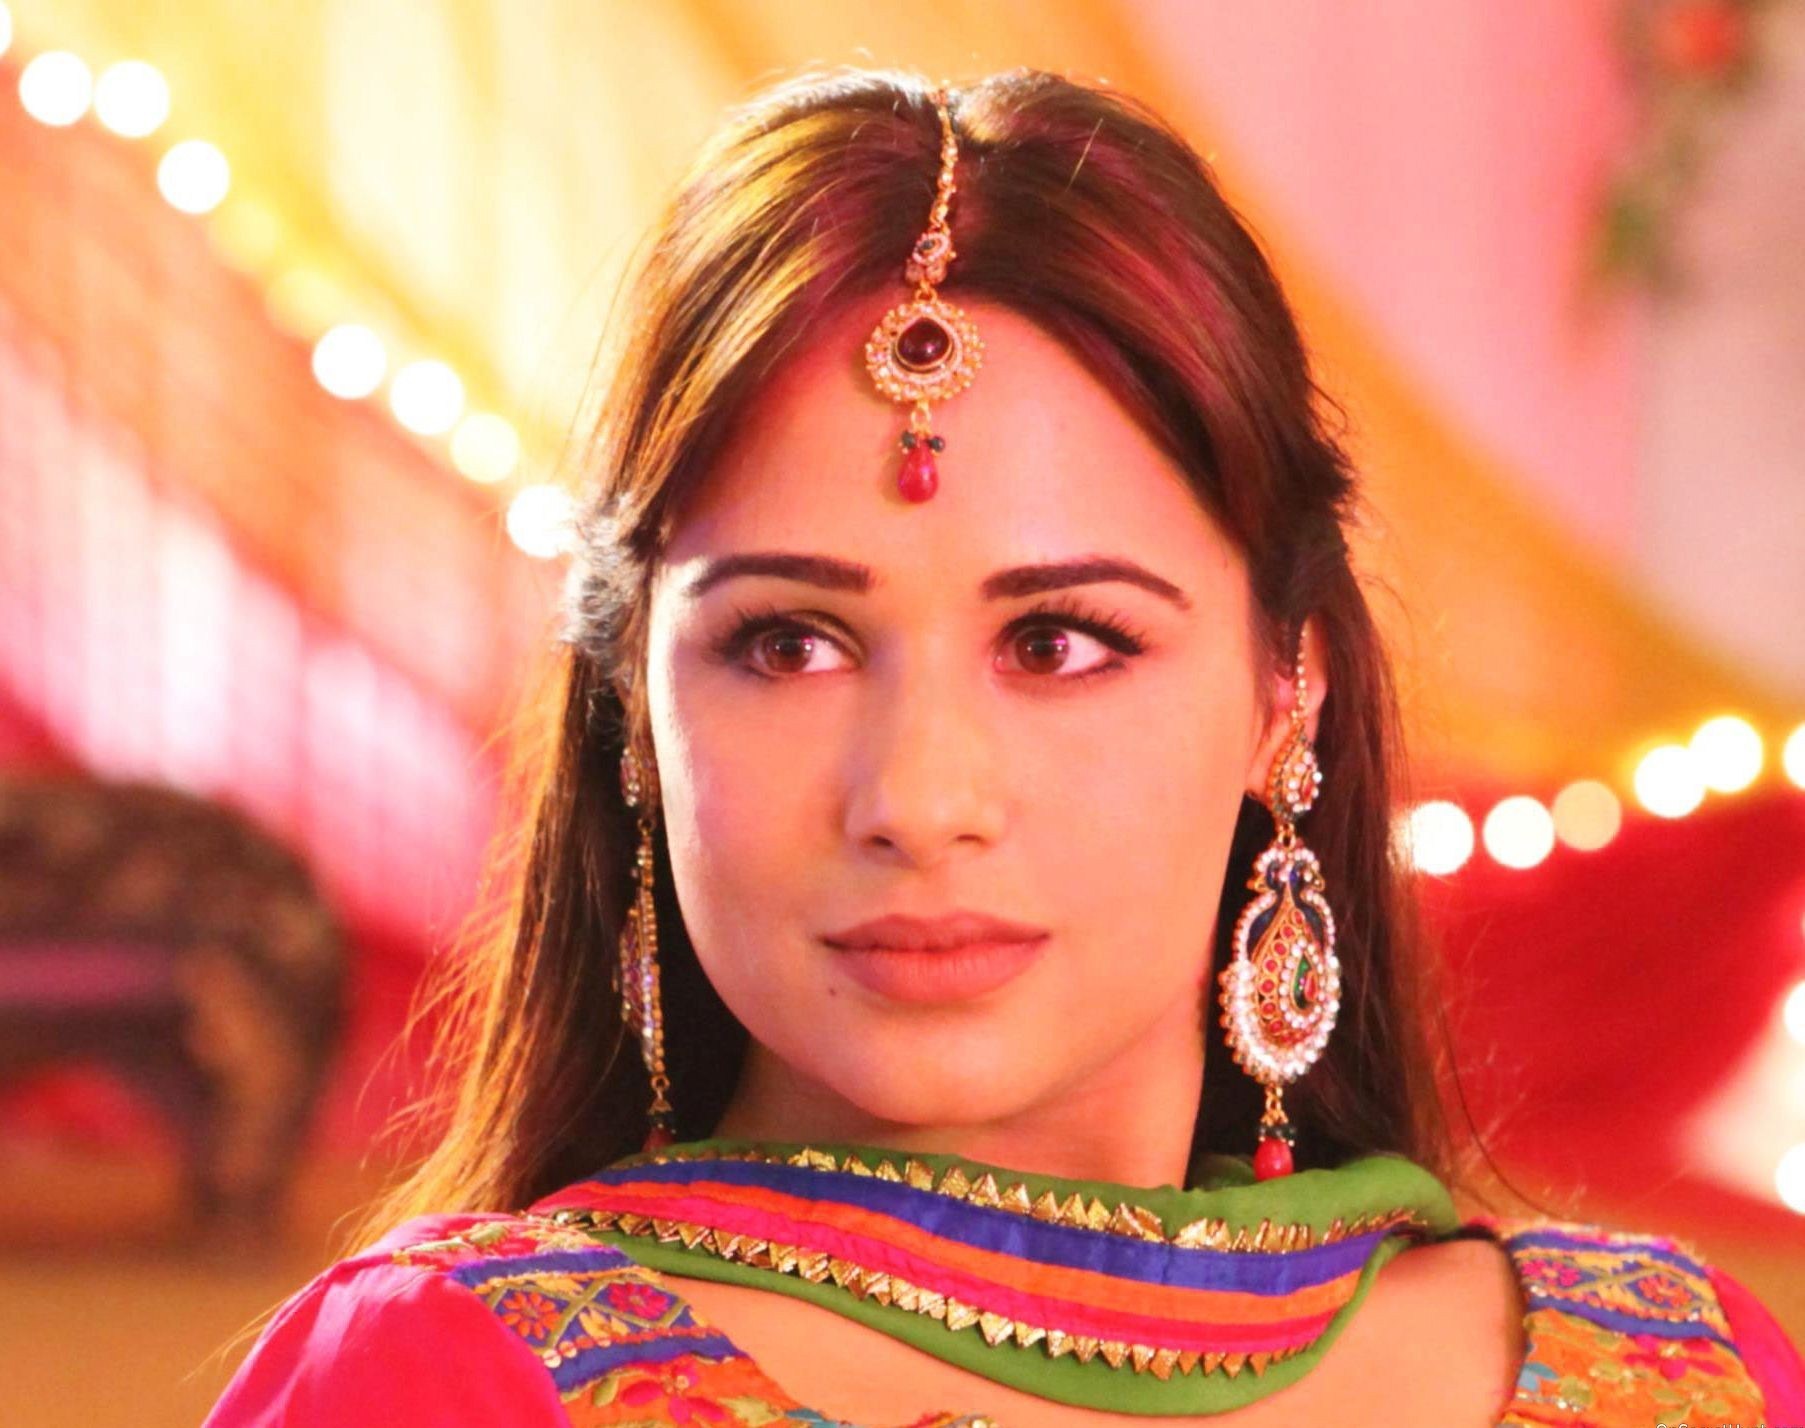 Punjabi Film Star Mandy Takhar Files FIR Against Culprits Who Made And Distributed A Morphed Fake Porn Video